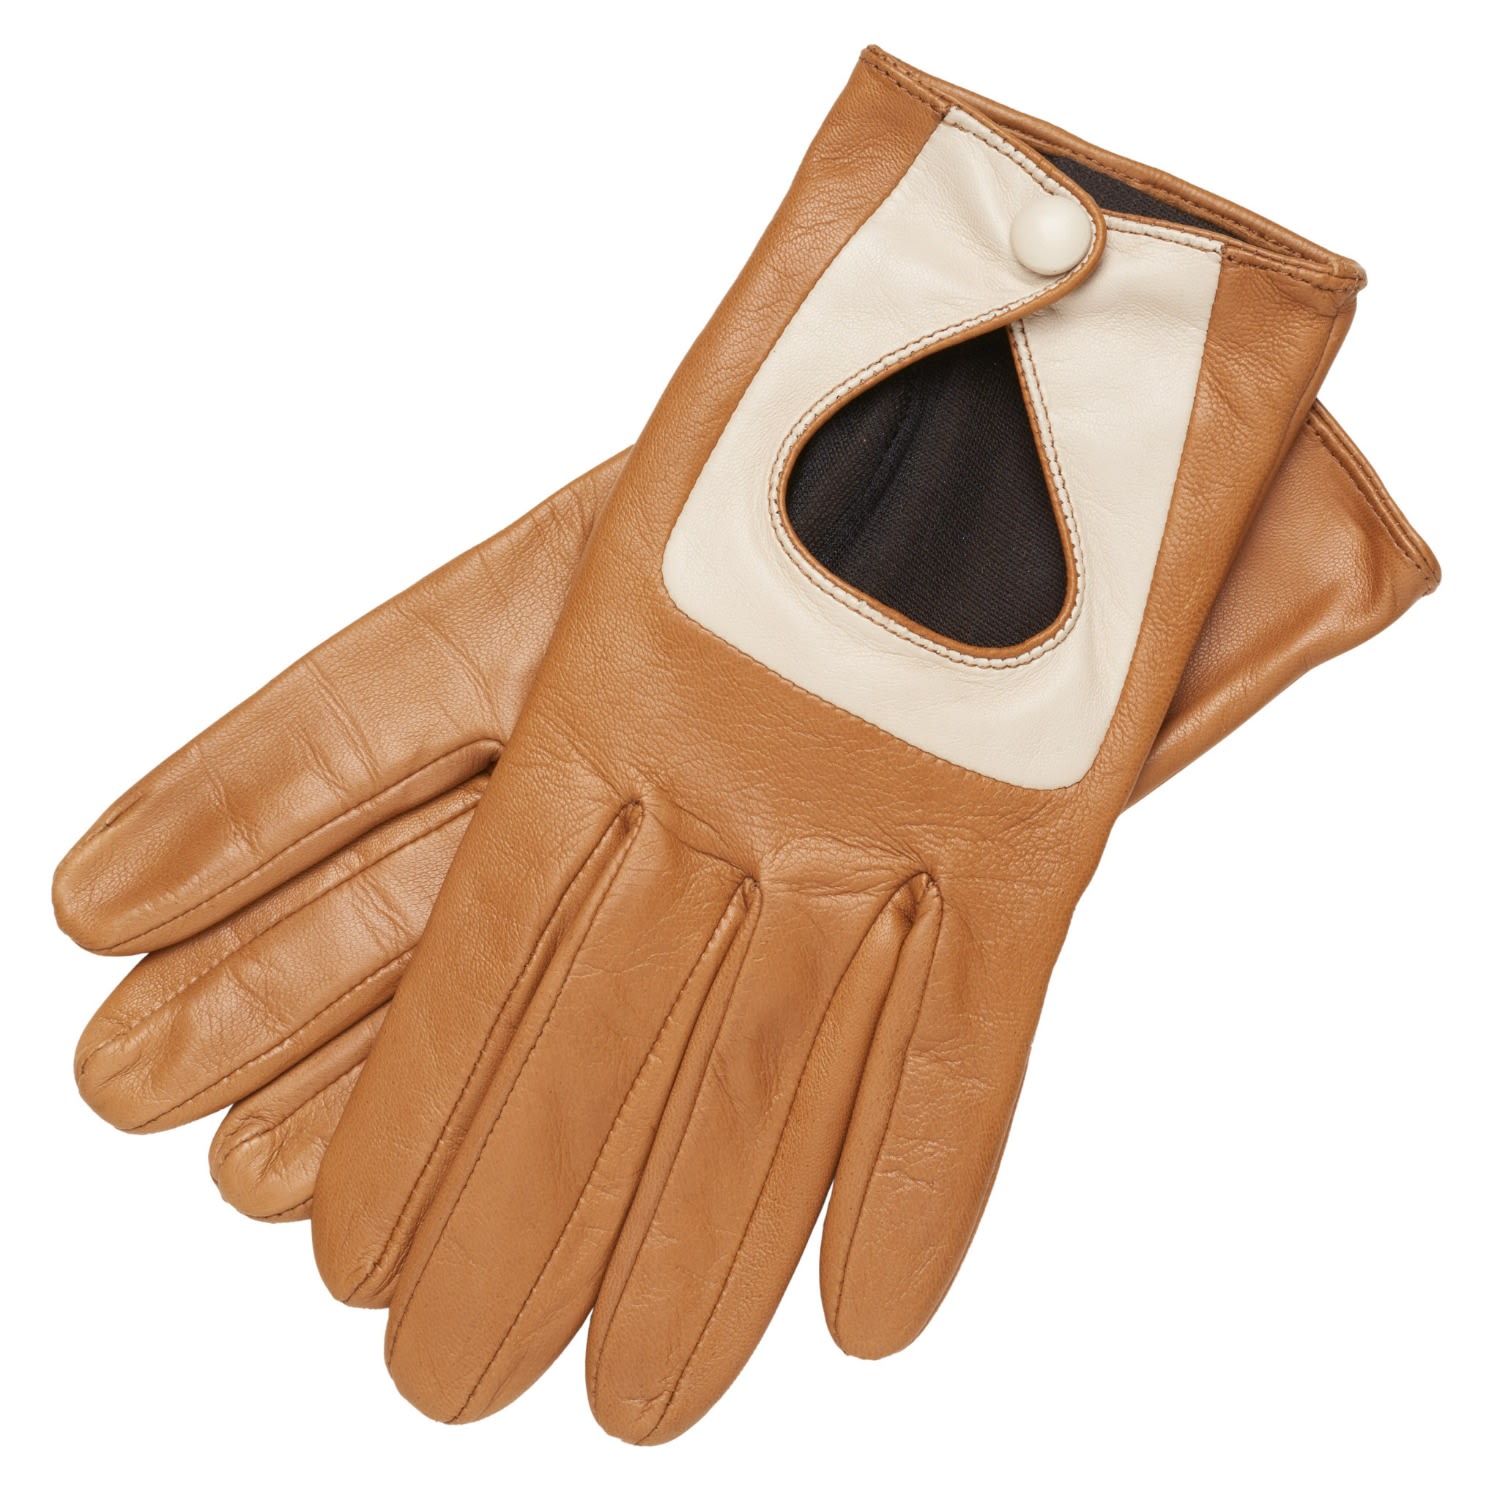 1861 Glove Manufactory Brown Livorno - Women's Leather Gloves In Camel With Creme